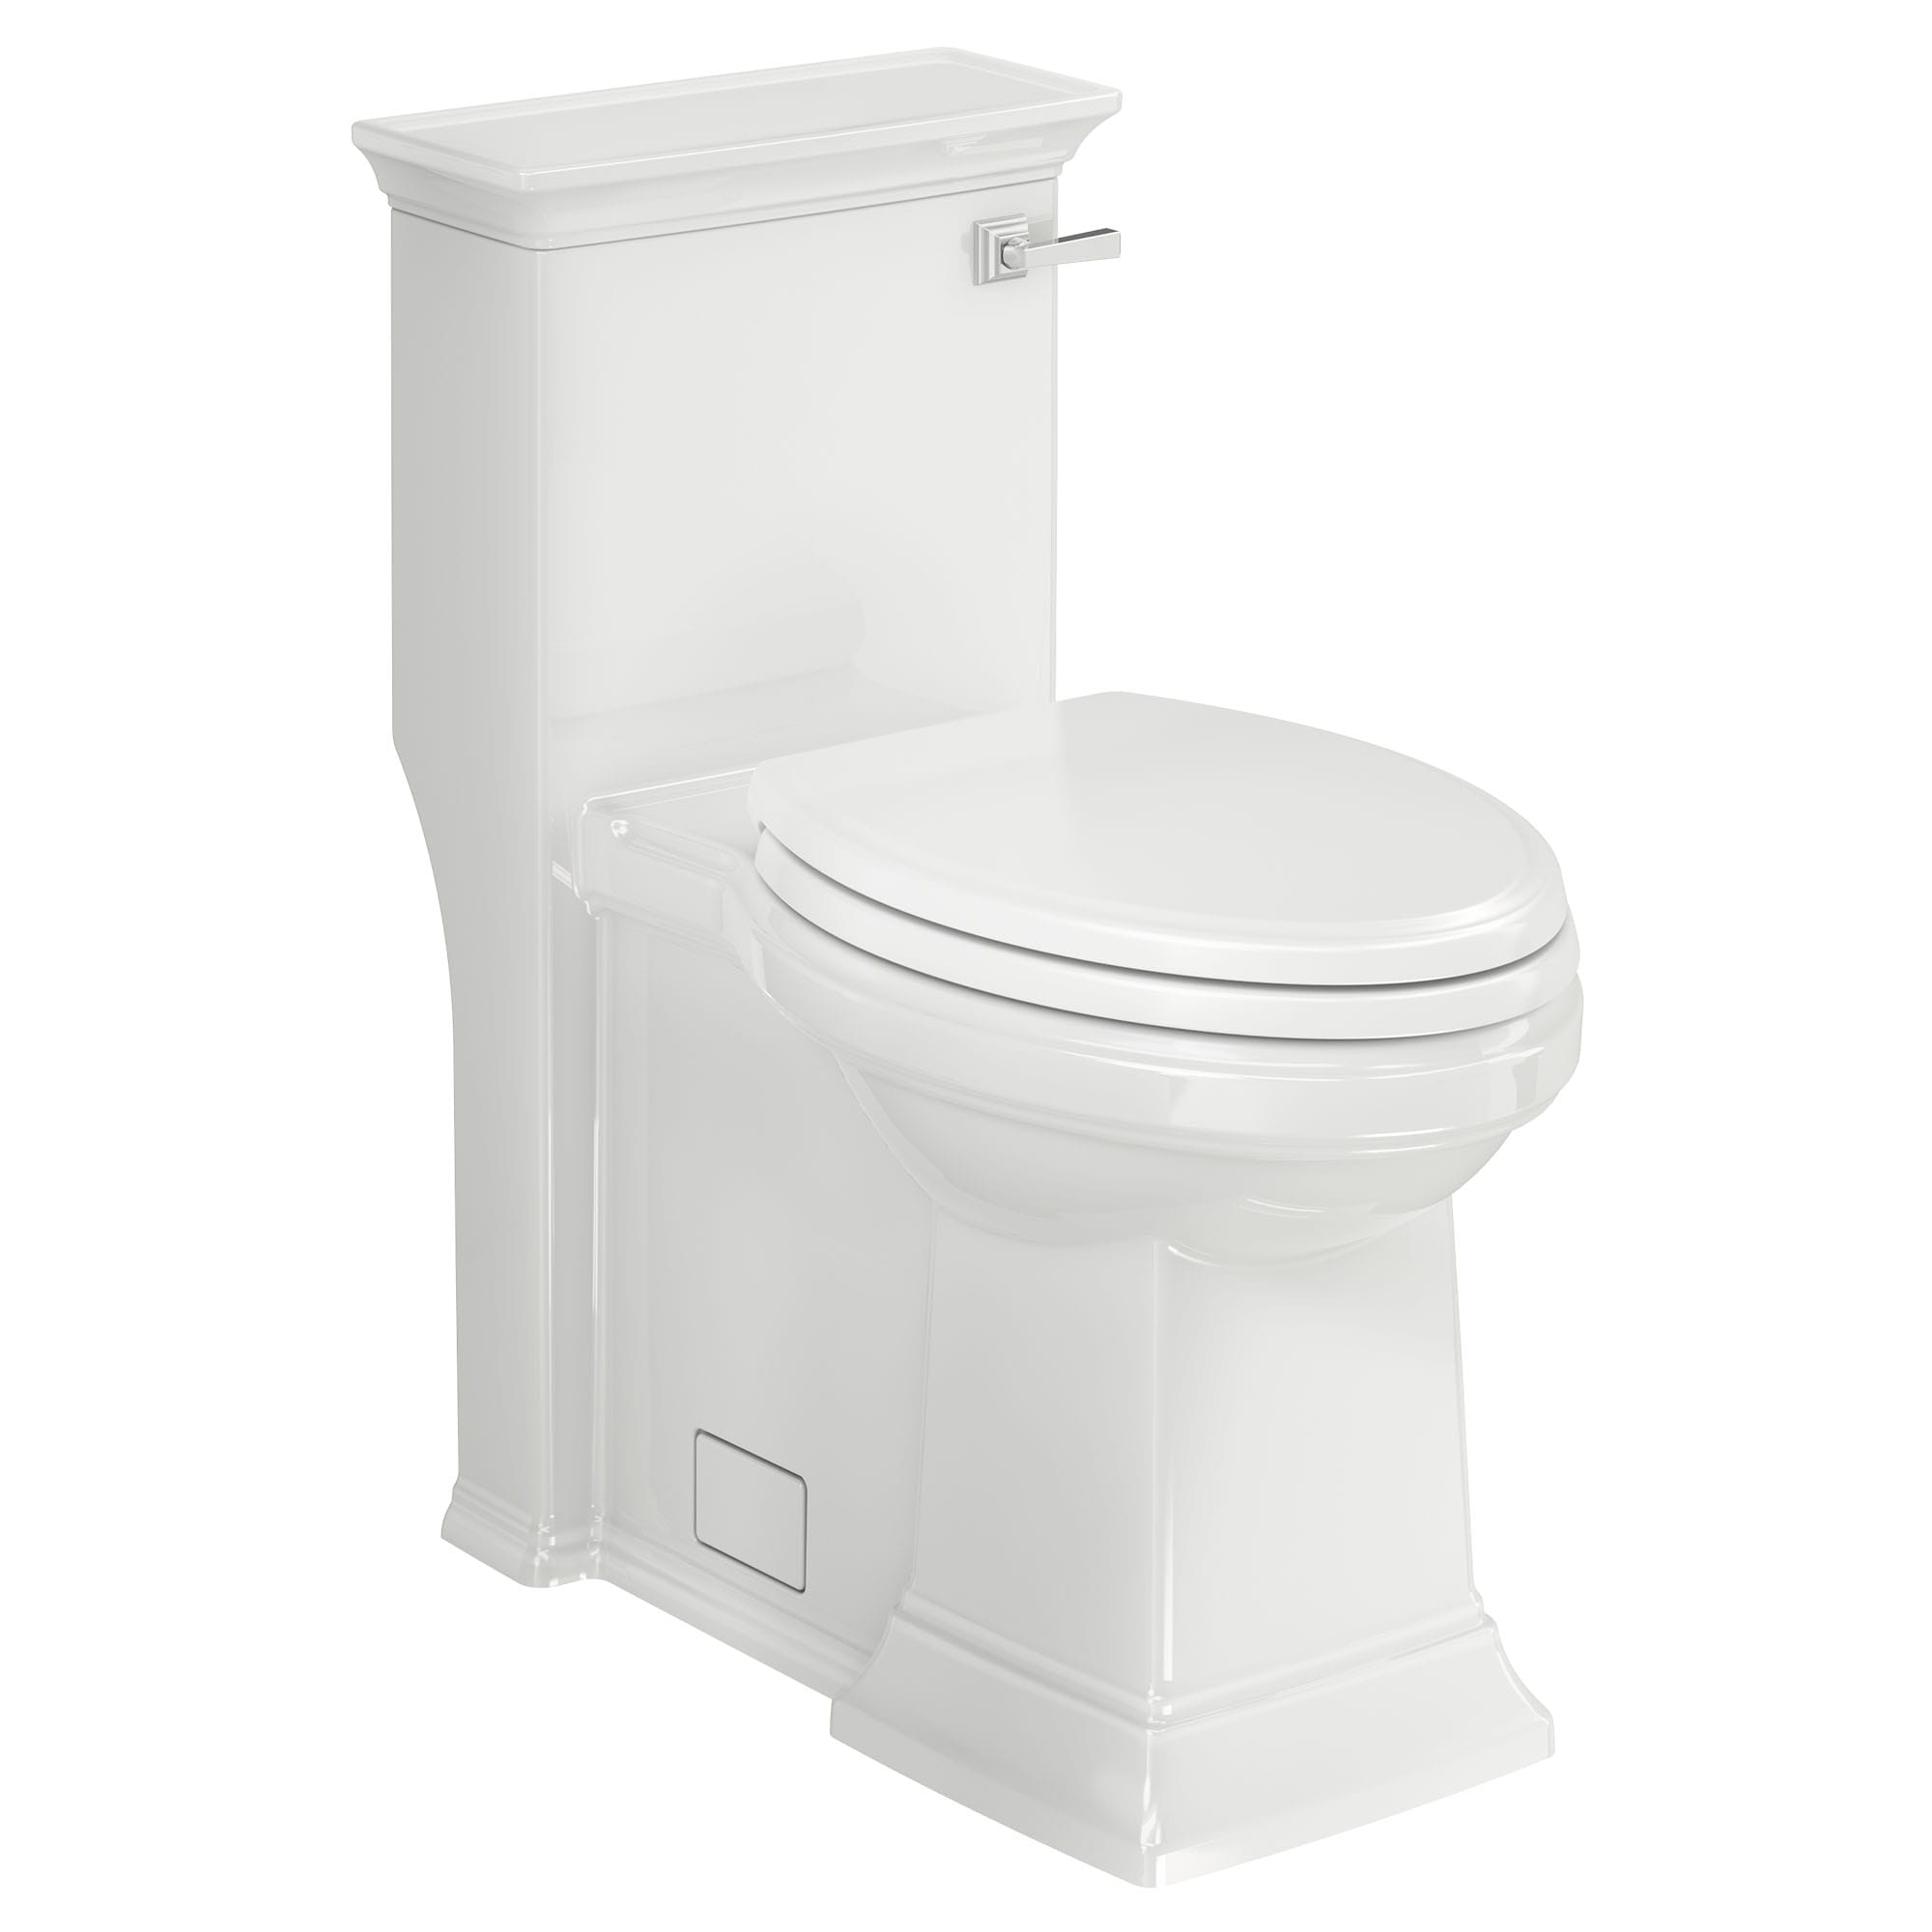 Town Square® S One-Piece 1.28 gpf/4.8 Lpf Chair Height Right-Hand Trip Lever Elongated Toilet With Seat